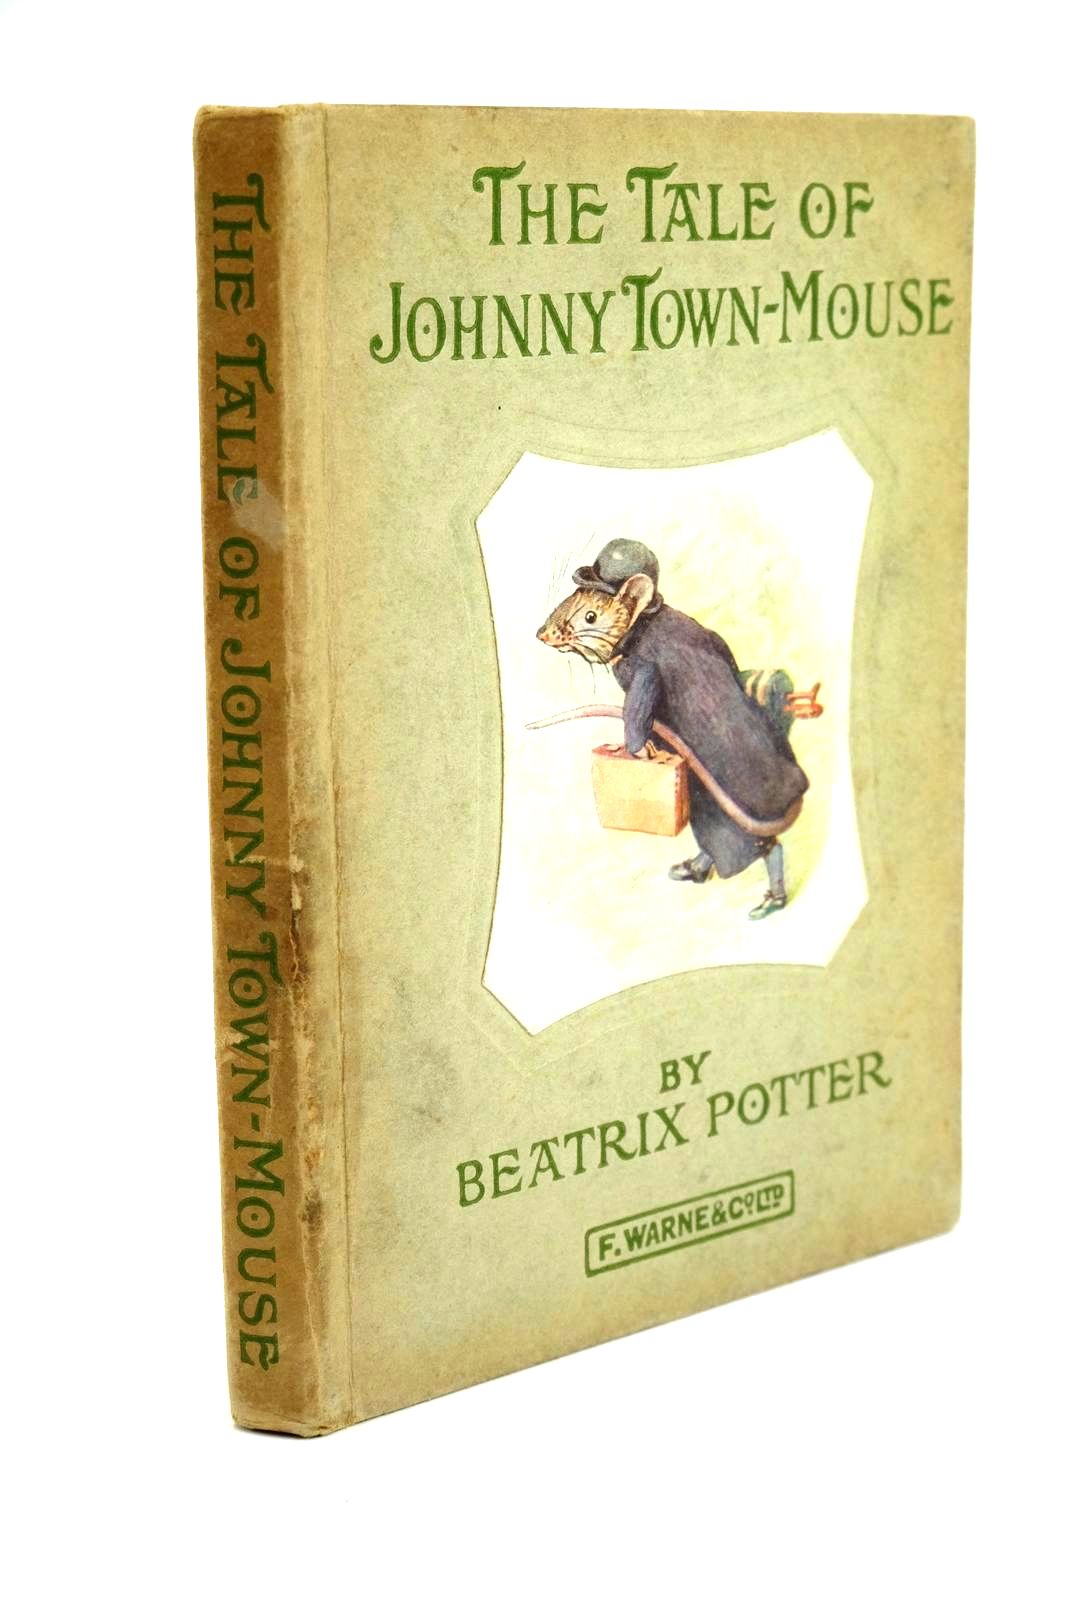 Photo of THE TALE OF JOHNNY TOWN-MOUSE written by Potter, Beatrix illustrated by Potter, Beatrix published by Frederick Warne & Co Ltd. (STOCK CODE: 1321686)  for sale by Stella & Rose's Books